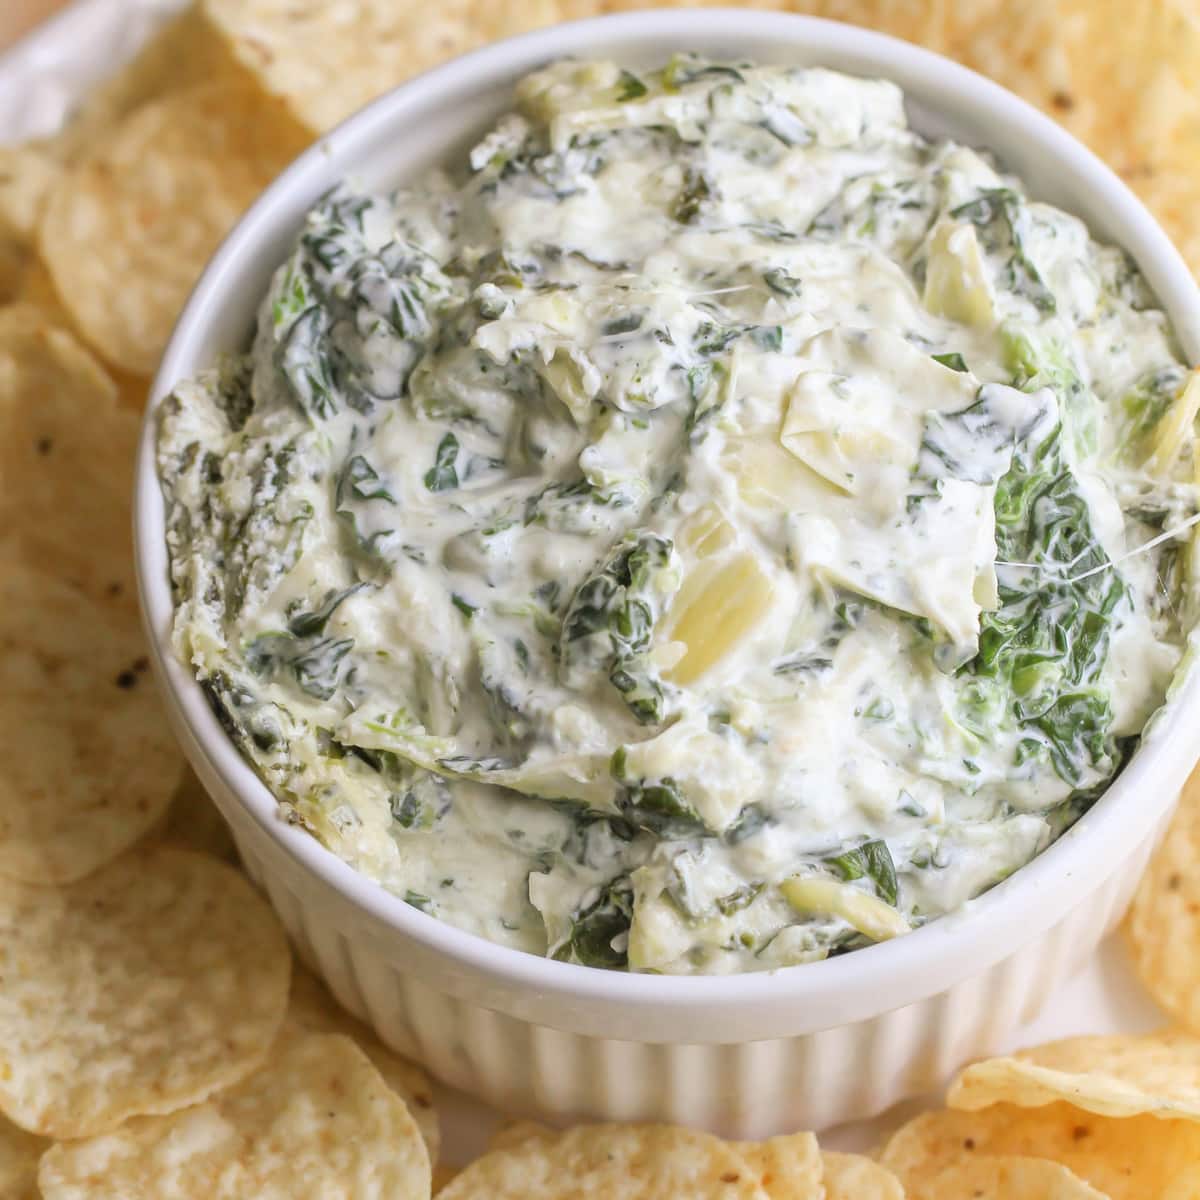 4th of July Appetizers - Spinach Artichoke Dip on a platter of tortilla chips.